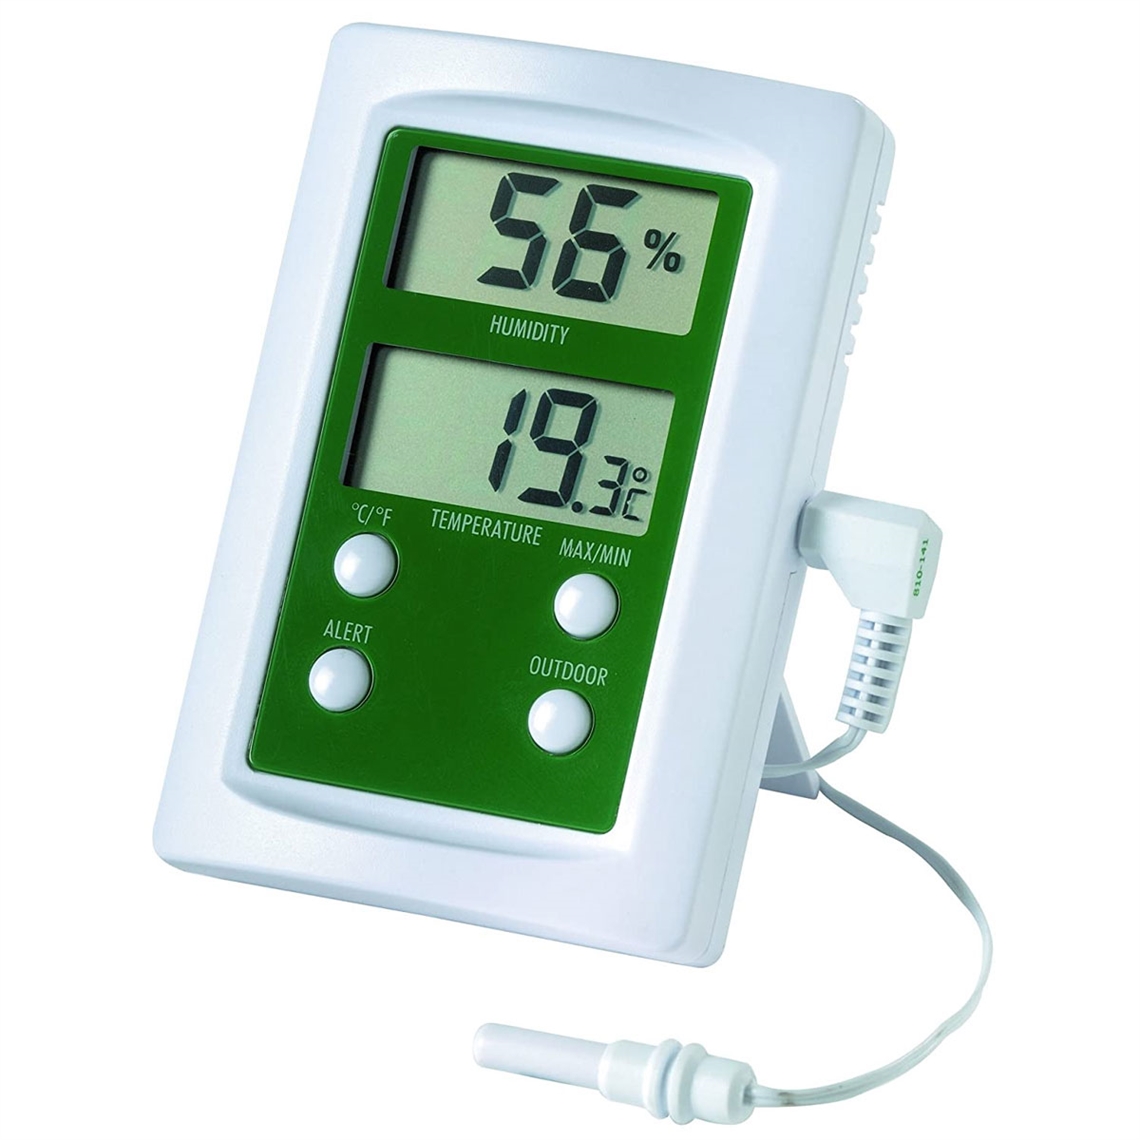 View more air conditioning from our Thermo Hygrometers range